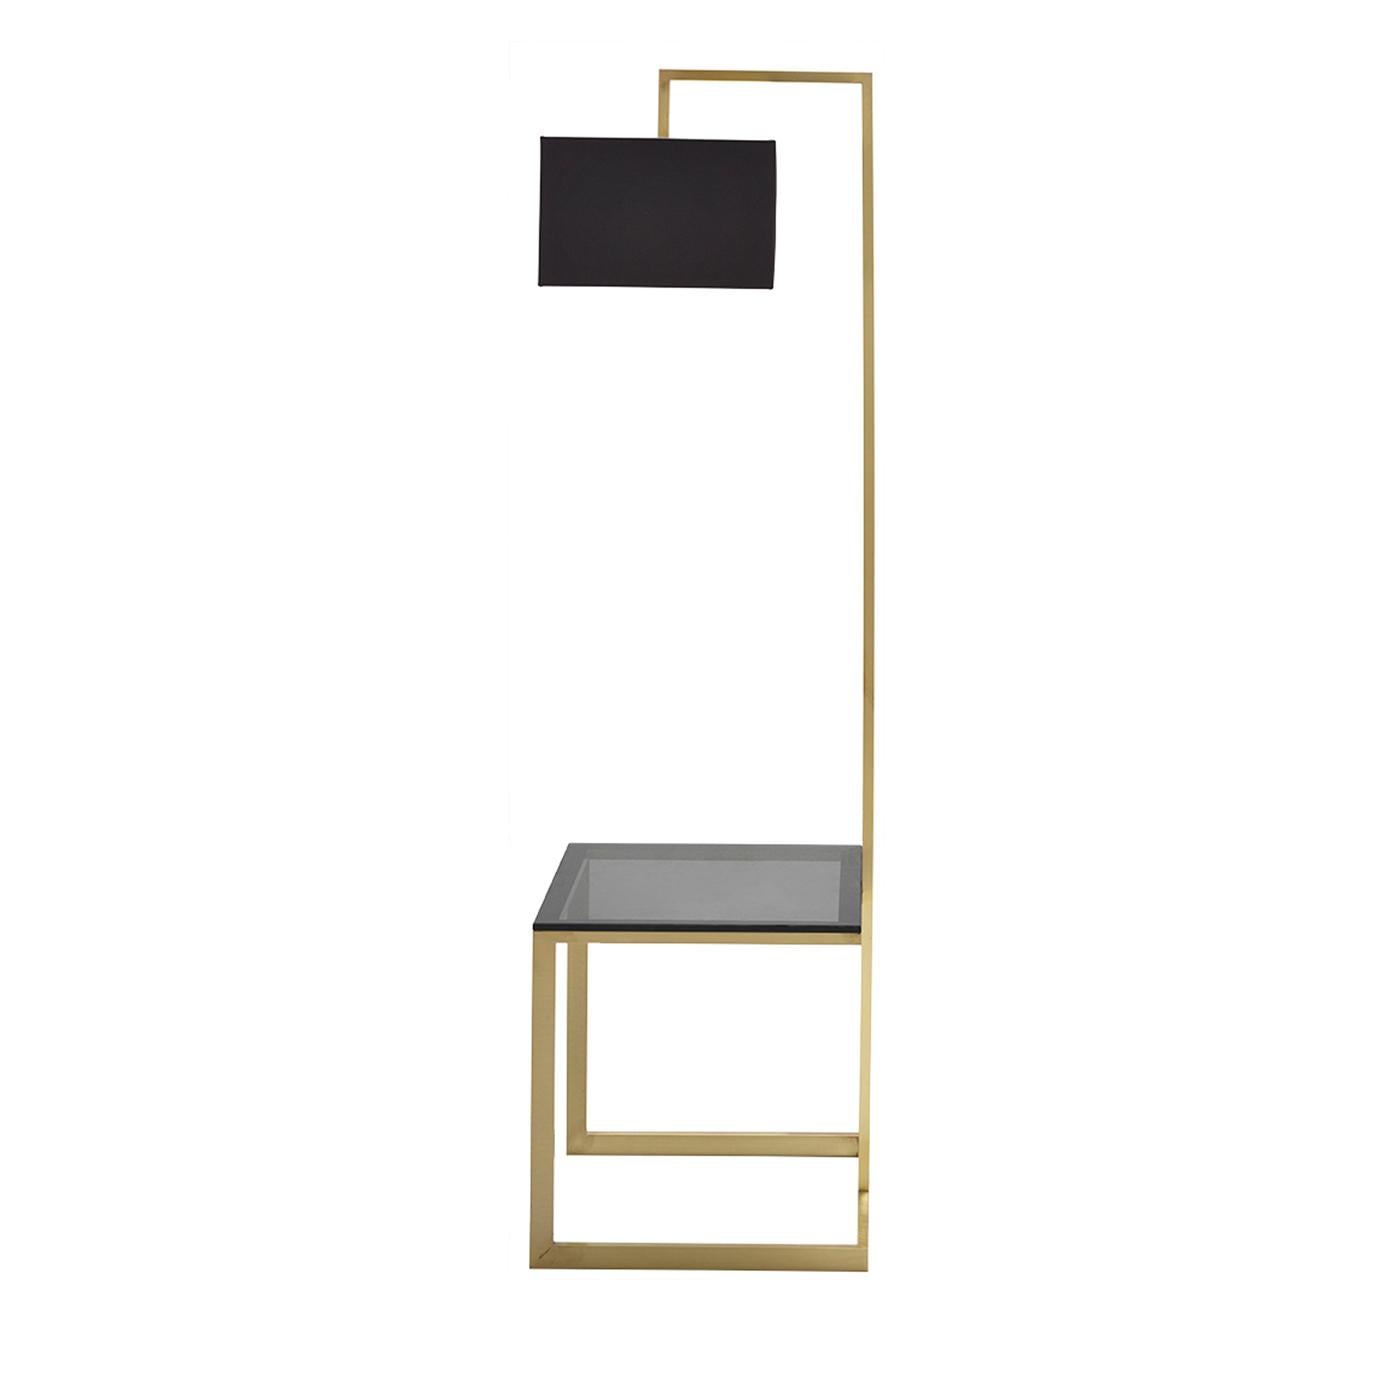 A light source and side table in one, the Arona floor lamp is designed for Minimalist living spaces. On a burnished brass base, the table features a smoky glass top for a chic effect. The lamp extends from the center of the back of the table and is